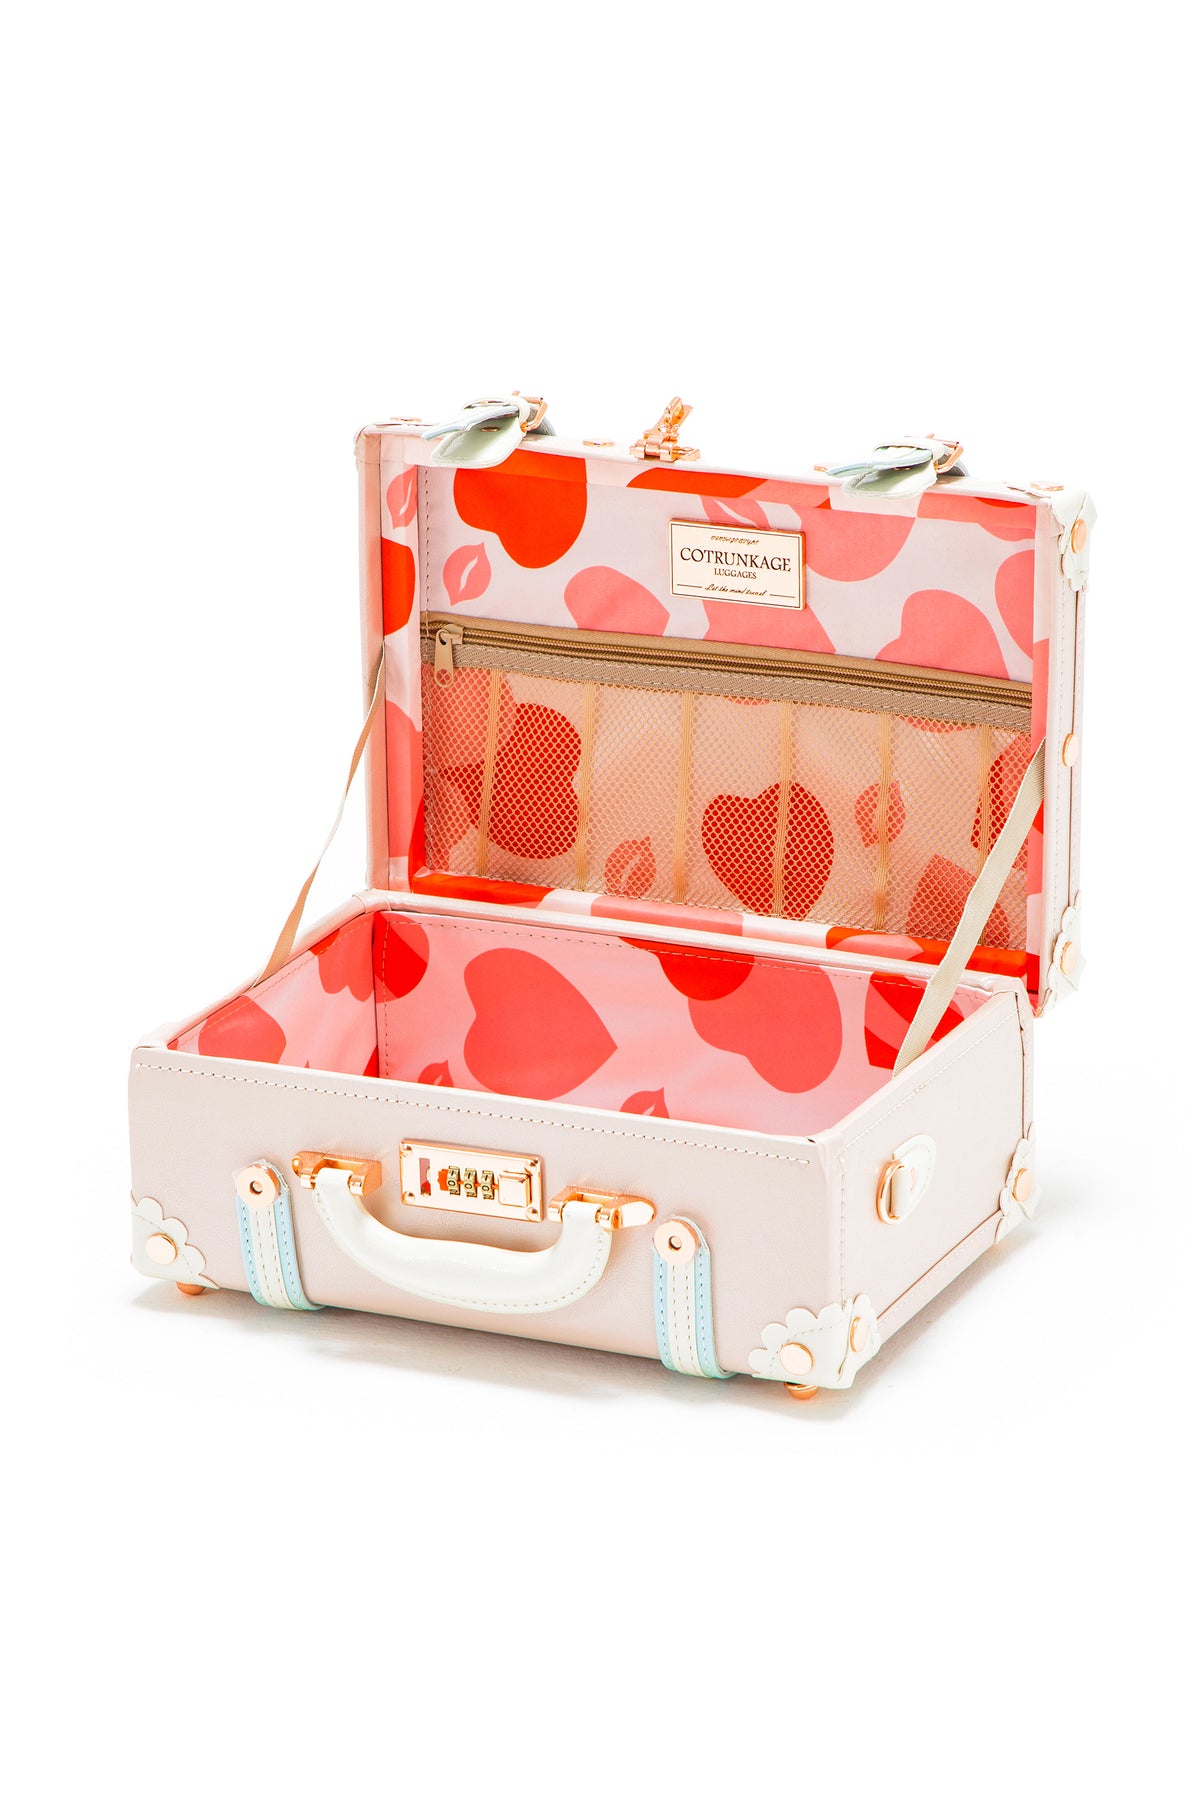 Other, Chic Pink Vintage Luggage Set